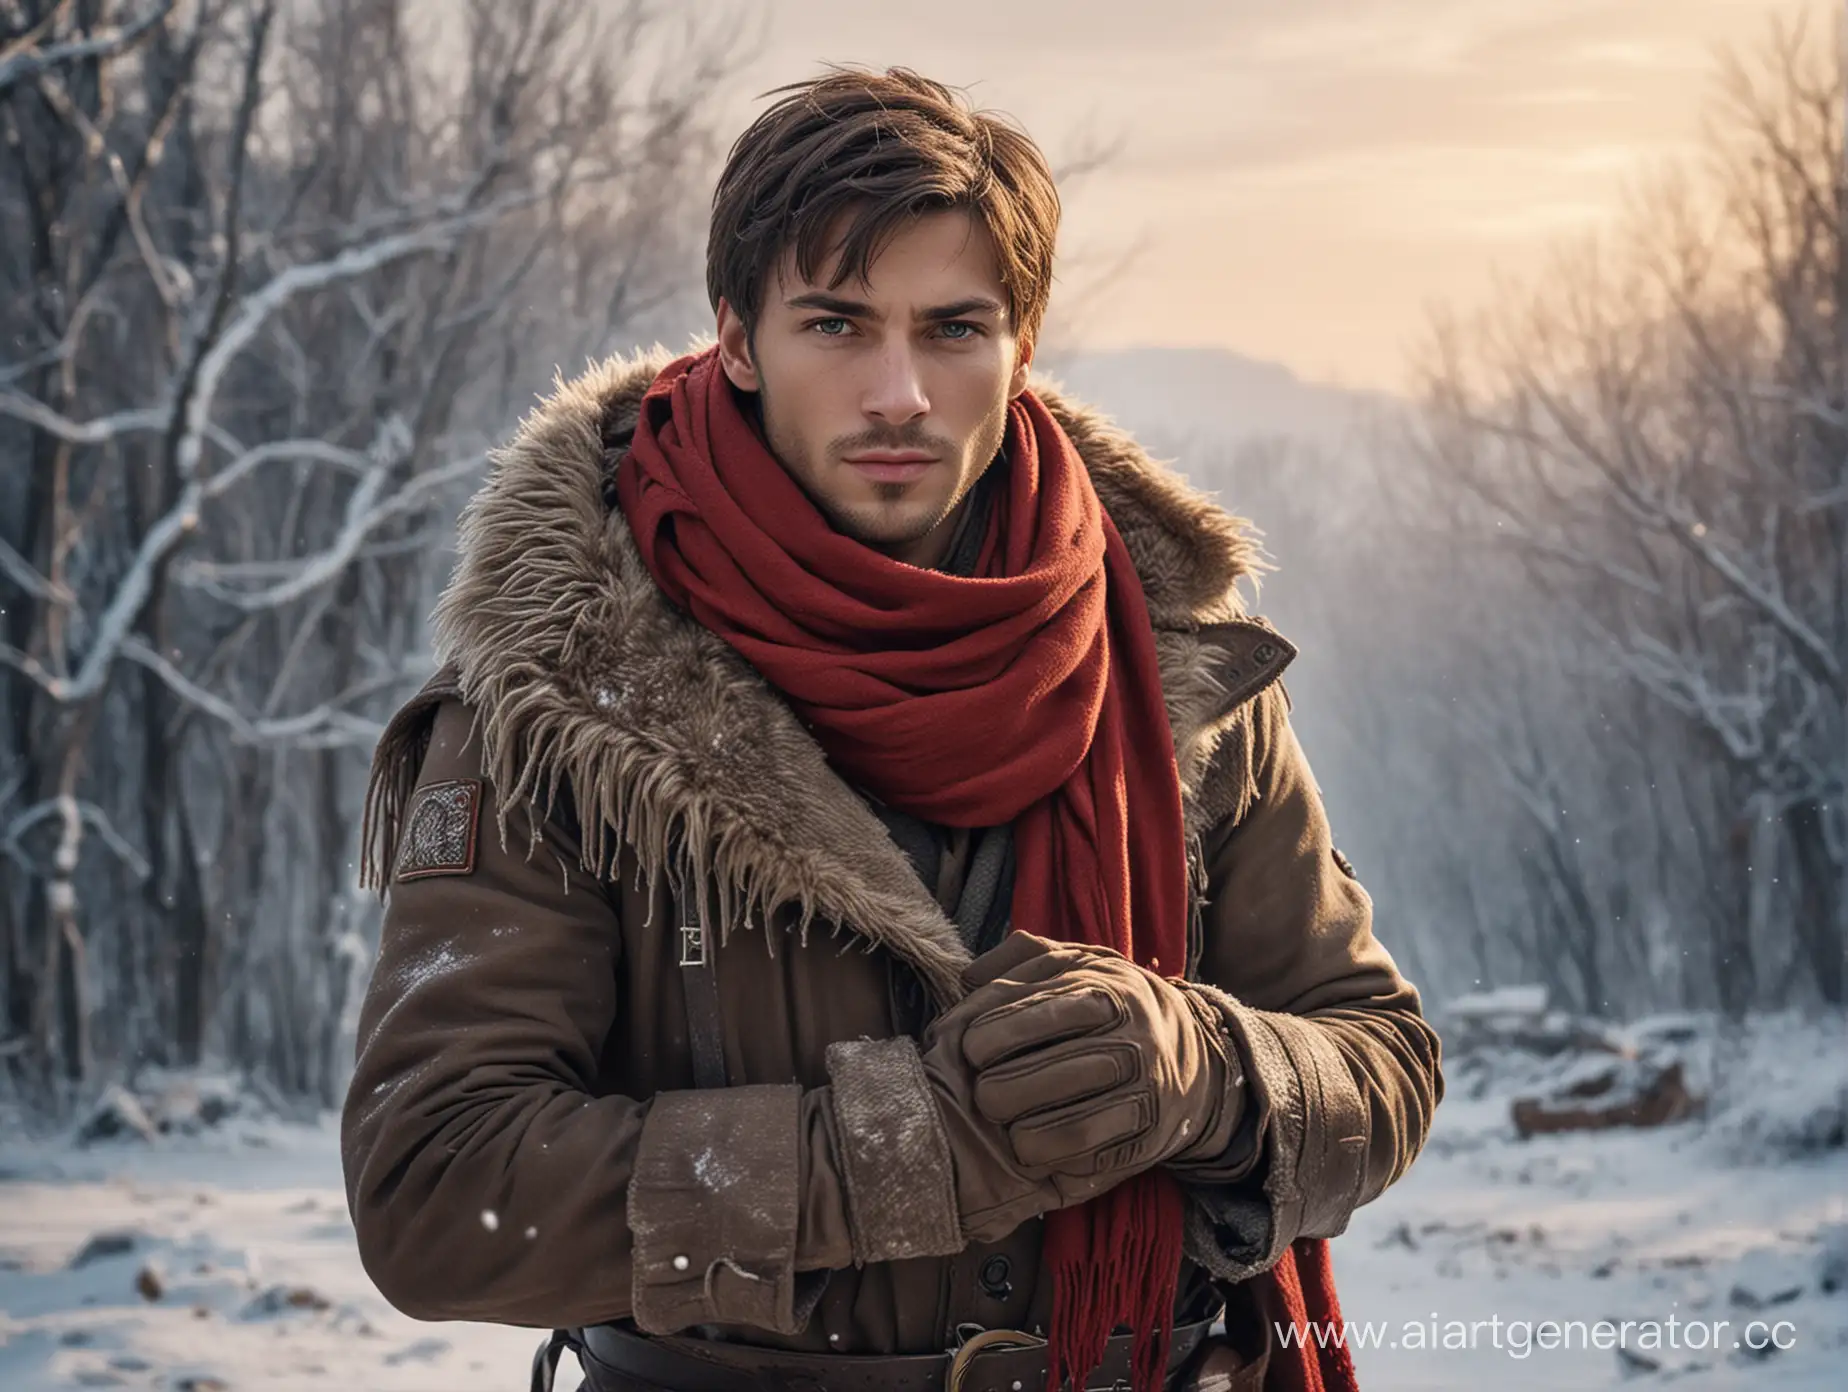 Gender: Male
Eye Color: brown
Skin color: light, Slavic
height: 1.85
Appearance:  beautiful both voice and body, the captain of the city of Winterhome, now he is destroyed, dressed in a red scarf one meter long, winter clothes, the city was in the north and therefore he had developed immunity to the cold,
when the city was destroyed, he wandered through the snowy desert and frosted his hand up to his forearm and now constantly wears a glove to hide a terrible burn from frostbite, is shy and smart